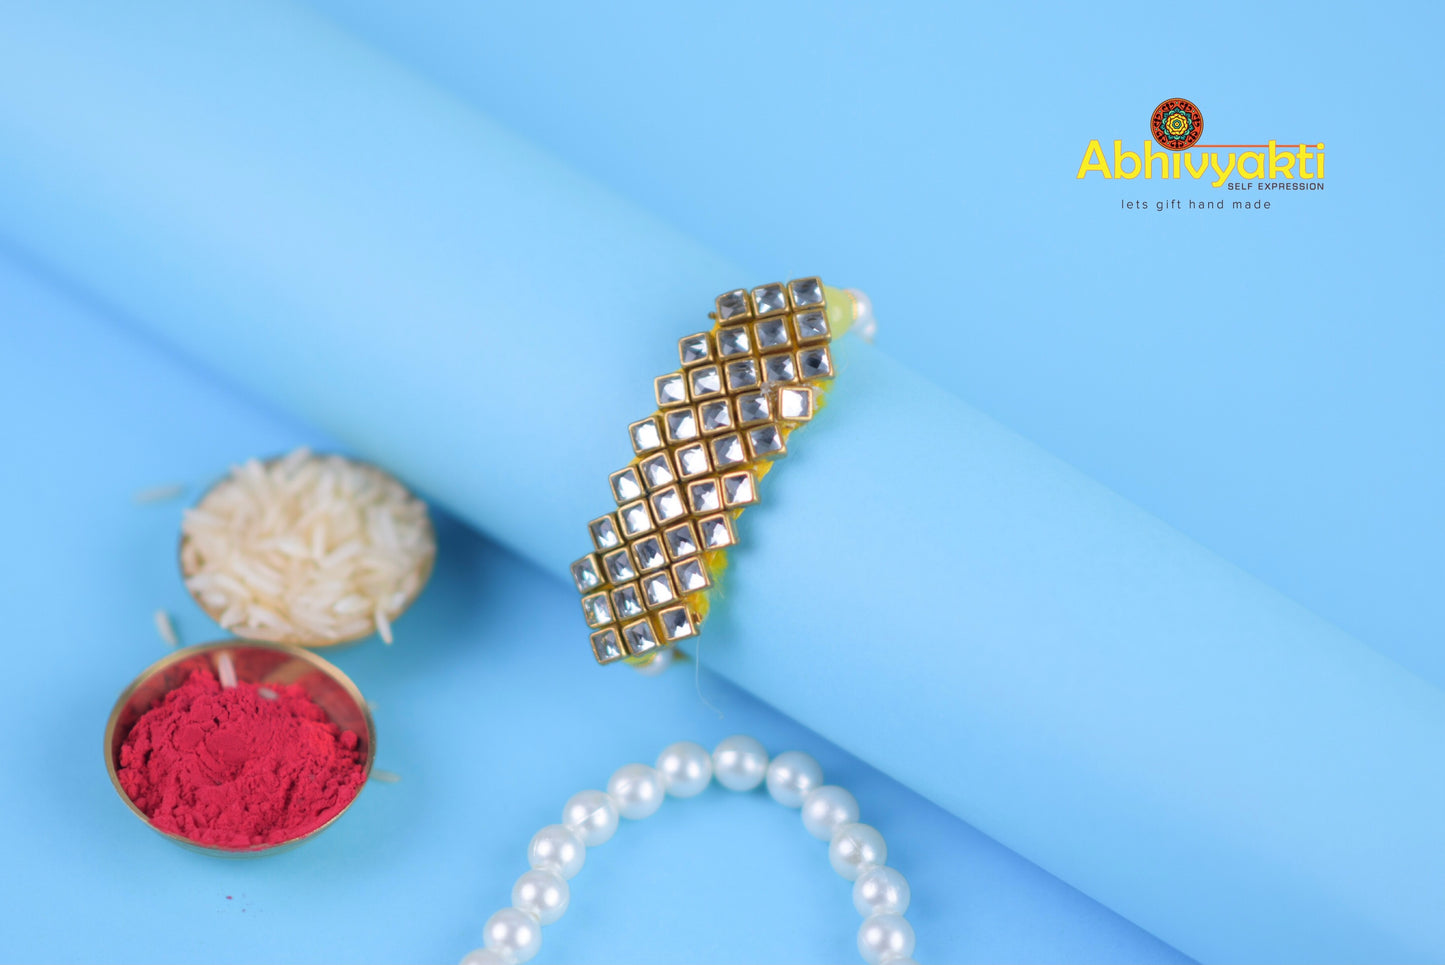 Stylish gold bracelet featuring pearls, red powder, stones, and beads.